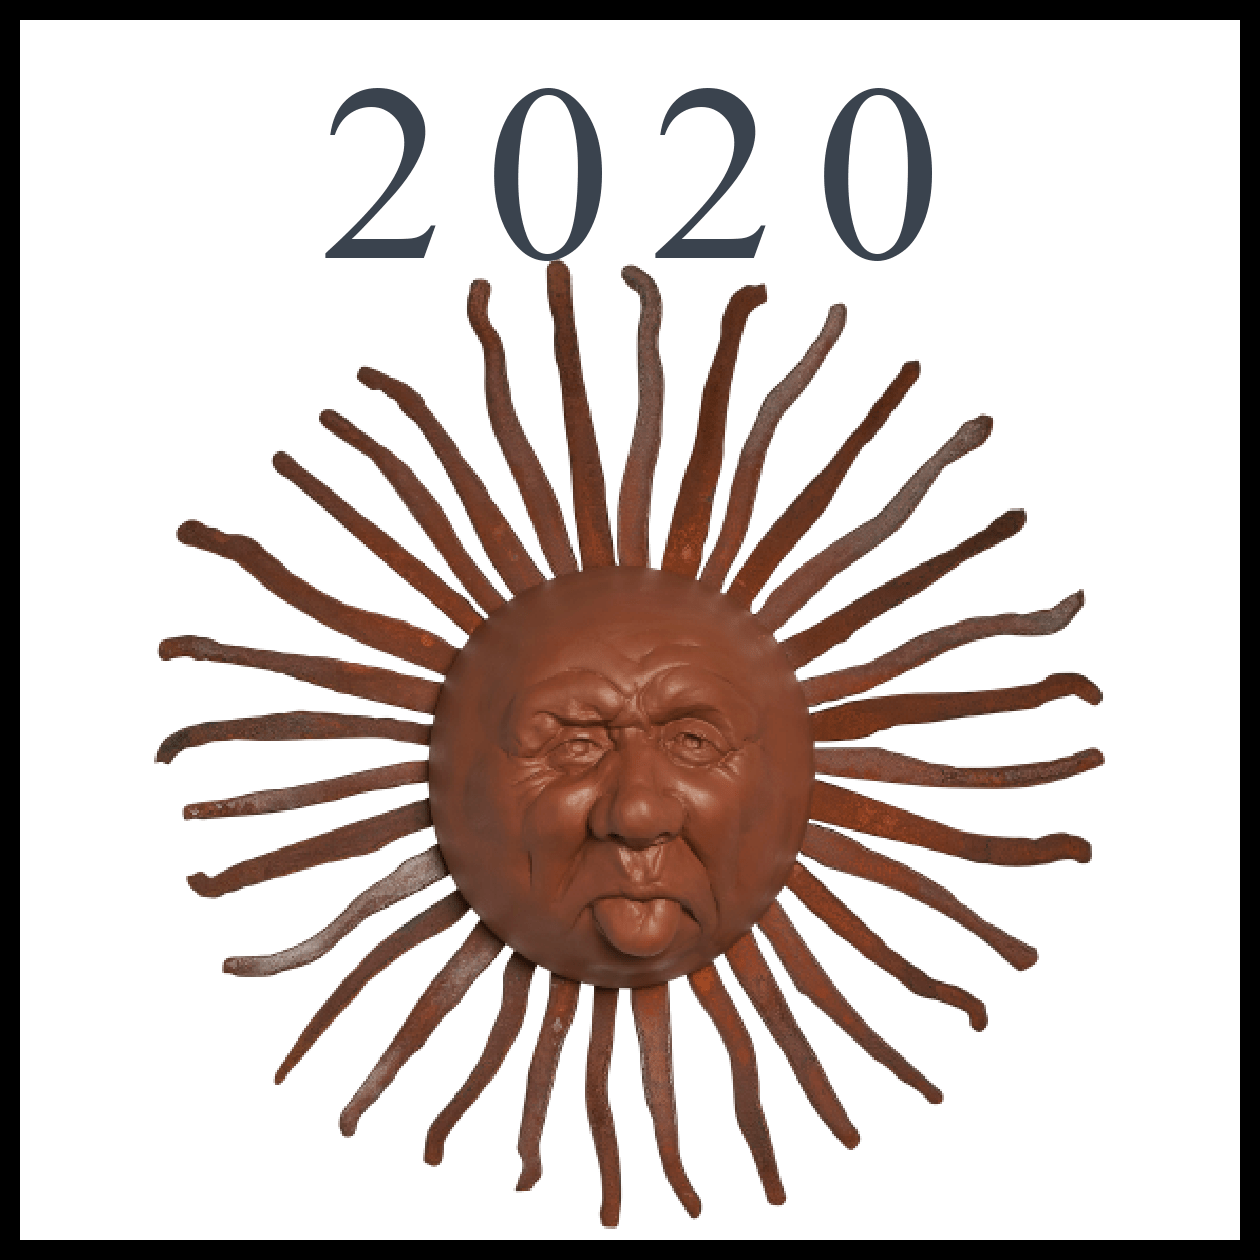 "My Name is 2020" Sun face made by Elizabeth Keith Designs